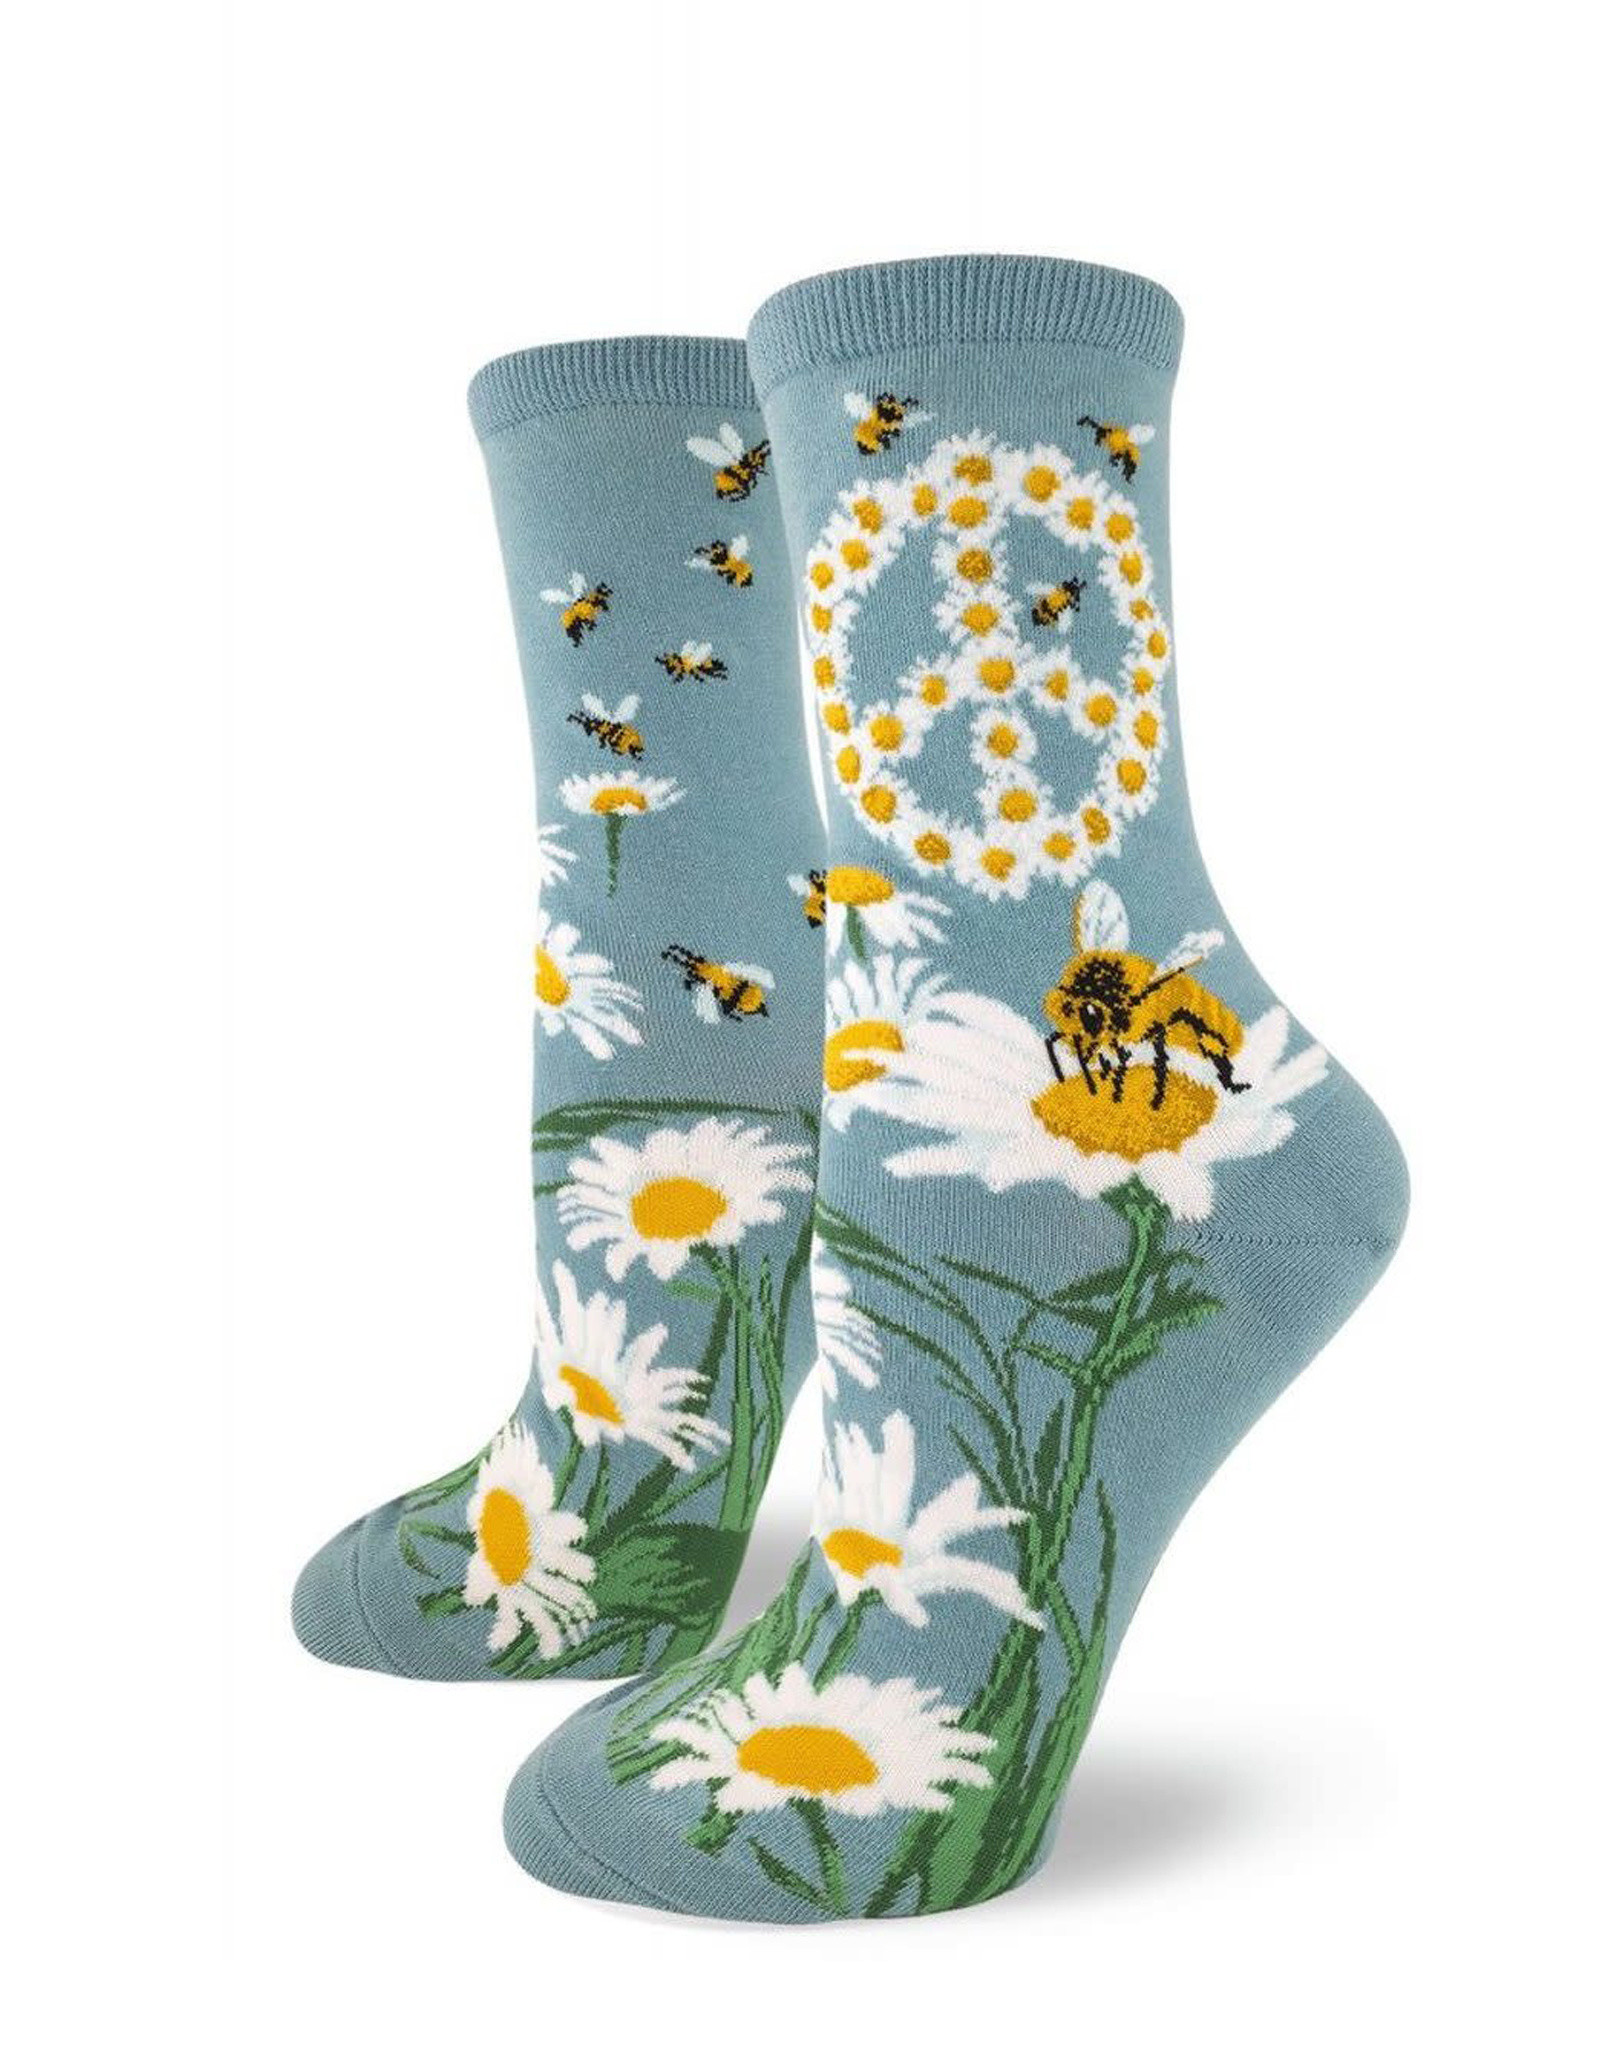 Give Bees A Chance Socks